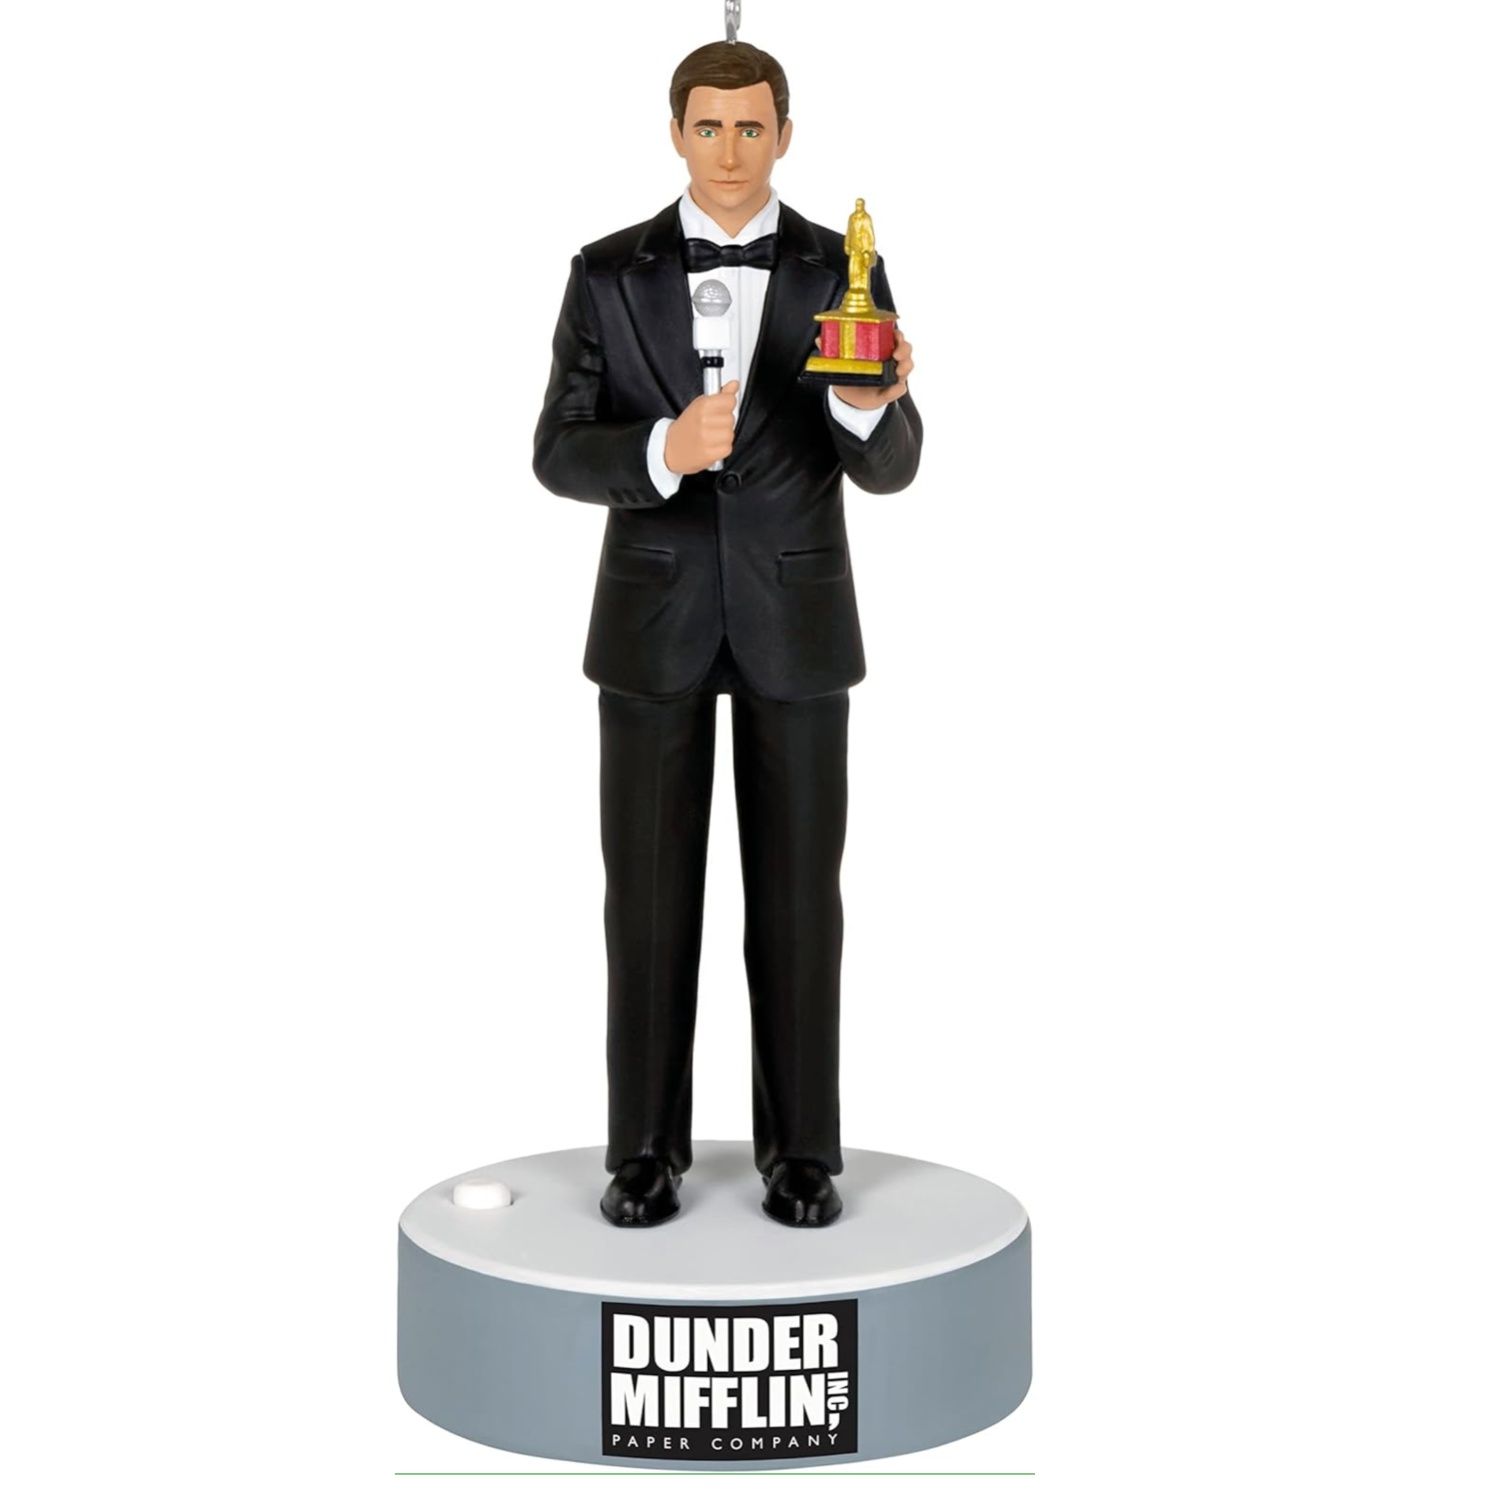 This image depicts a Michael Scott figurine where he is holding a Dundie award